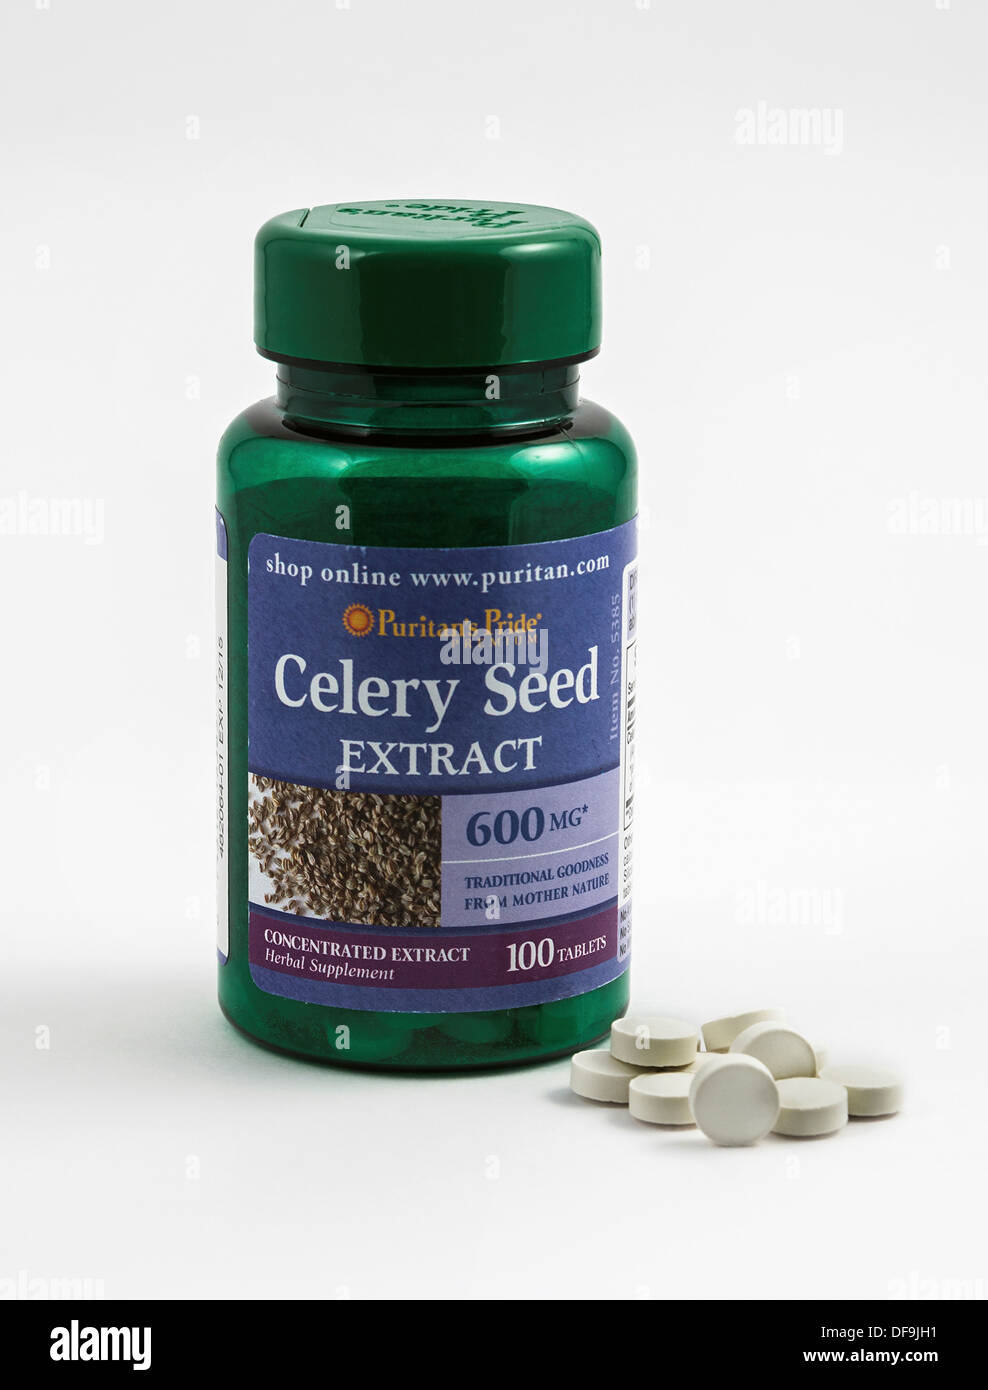 Celery seed extract tablets, a natural supplement often used to help high blood pressure. Stock Photo